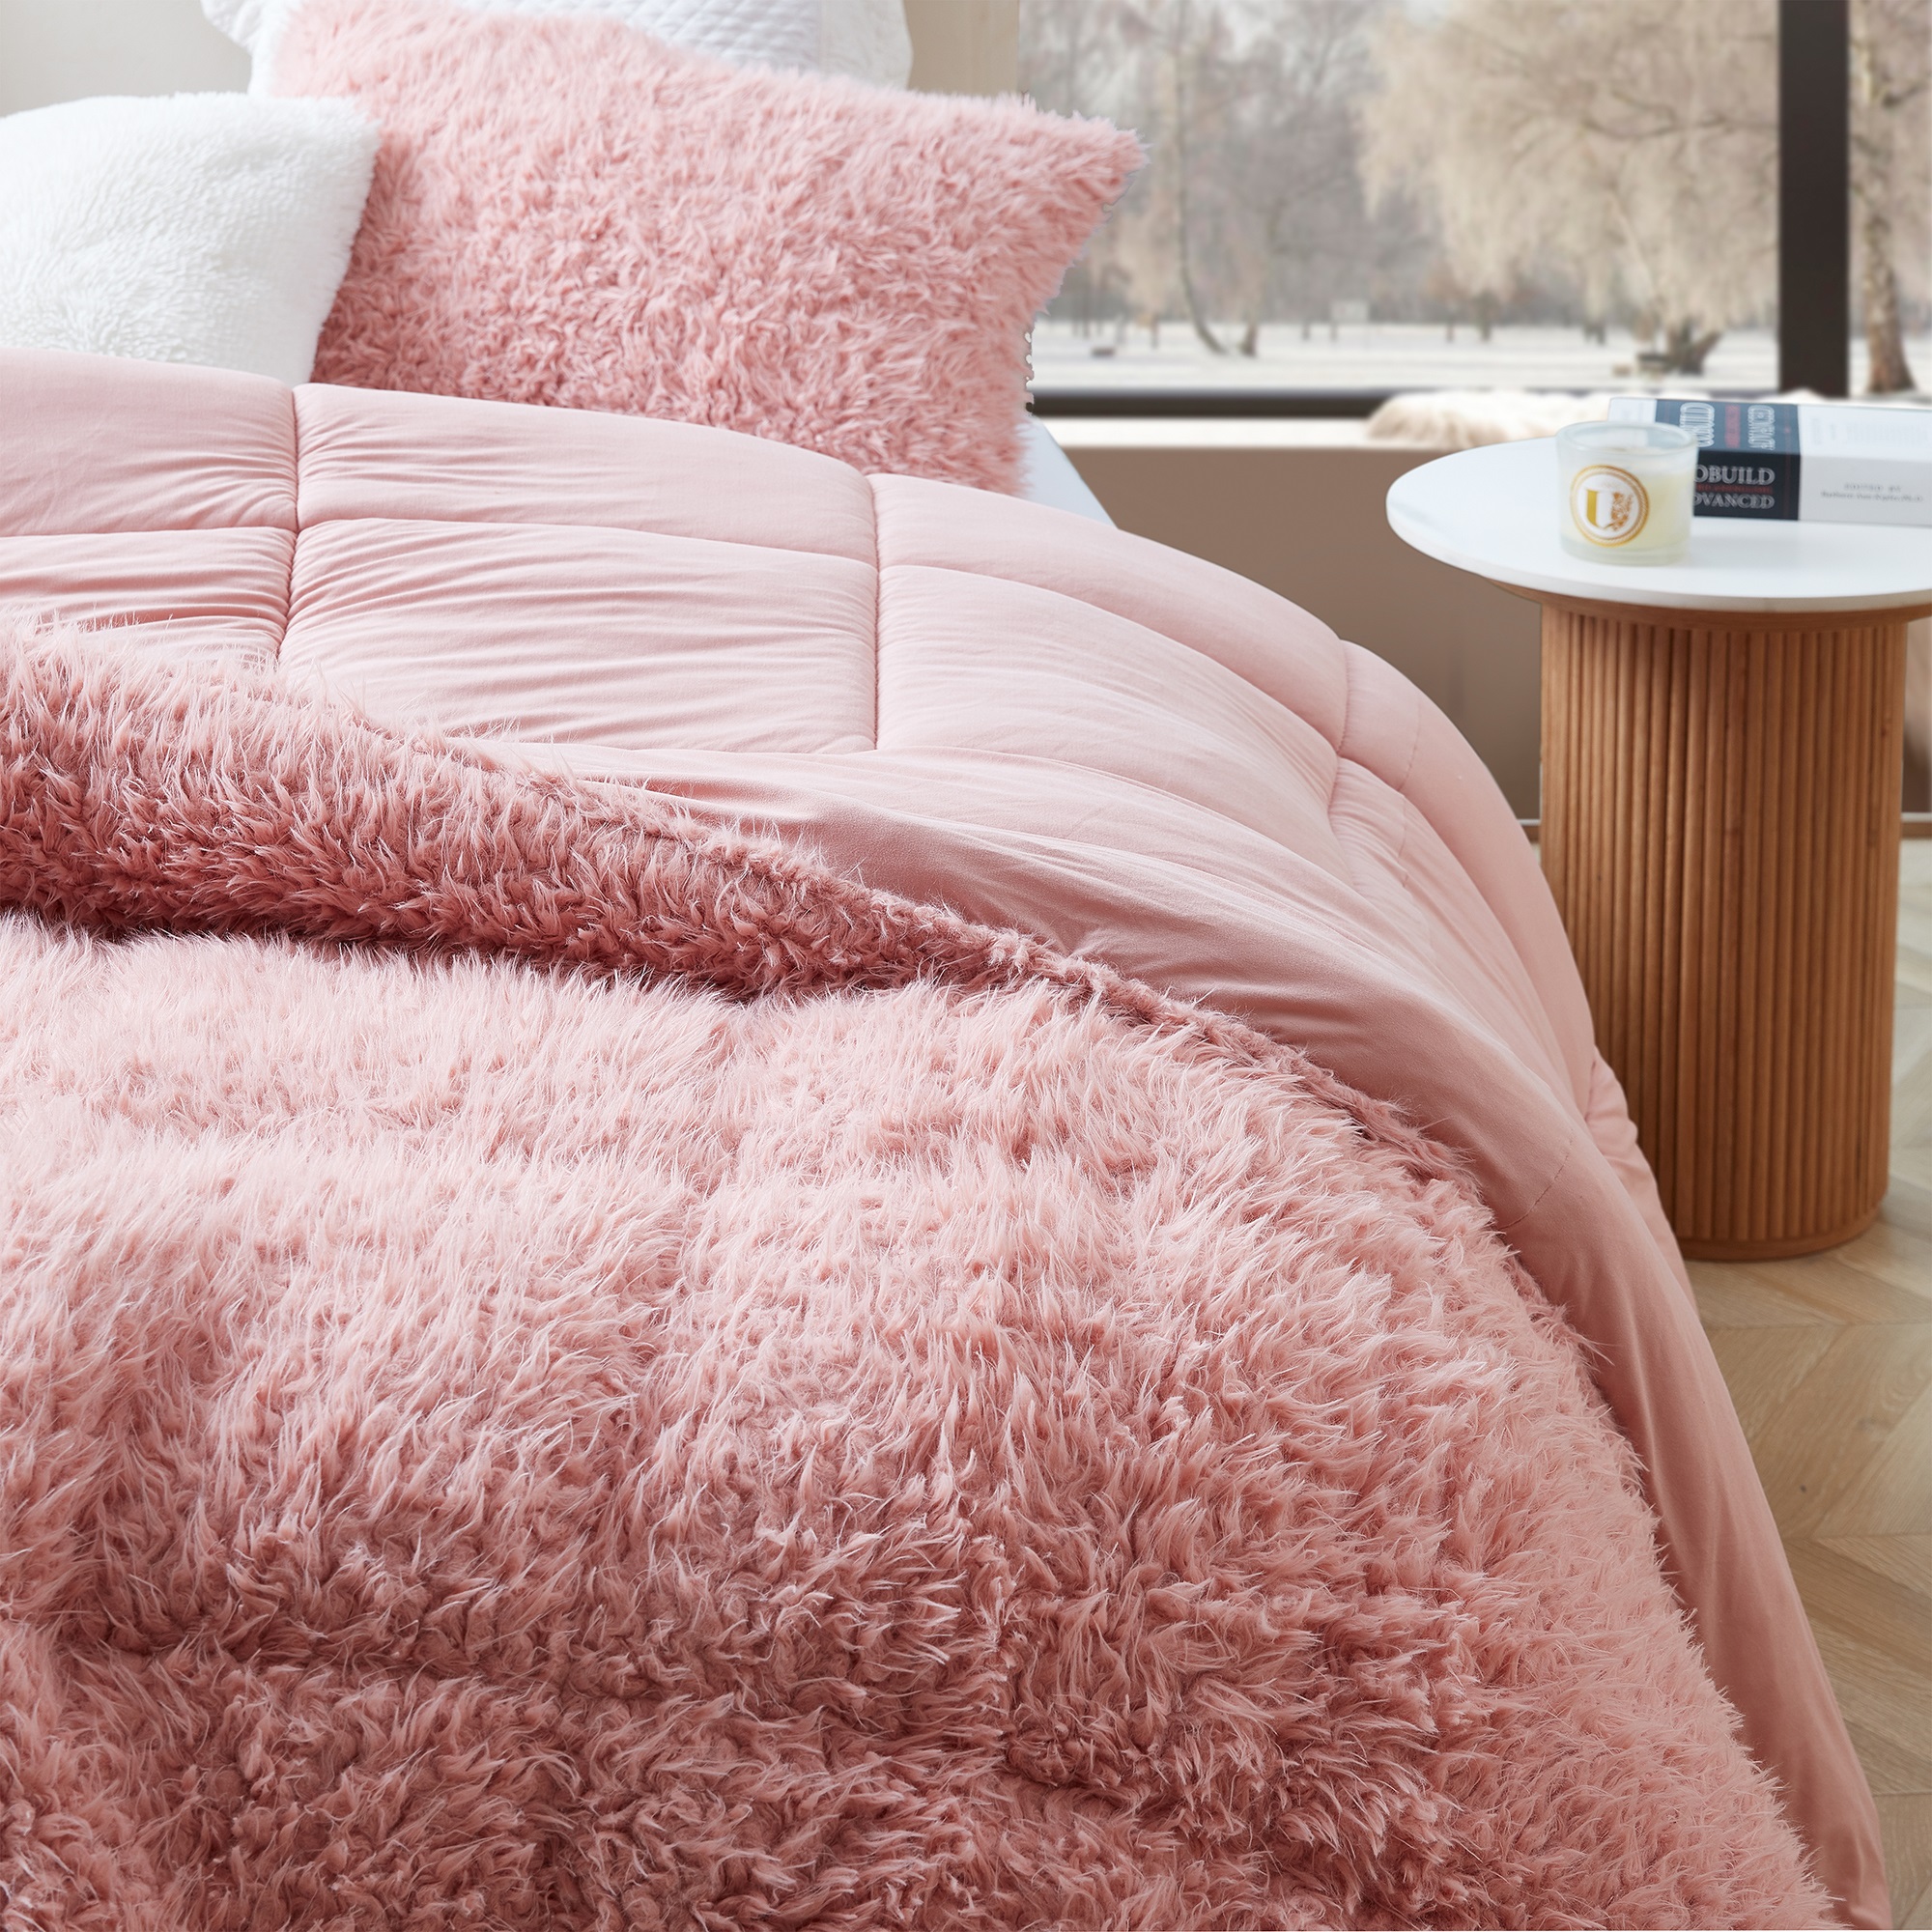 Queen of Sleep - Coma Inducer Oversized Comforter - Silver Pink